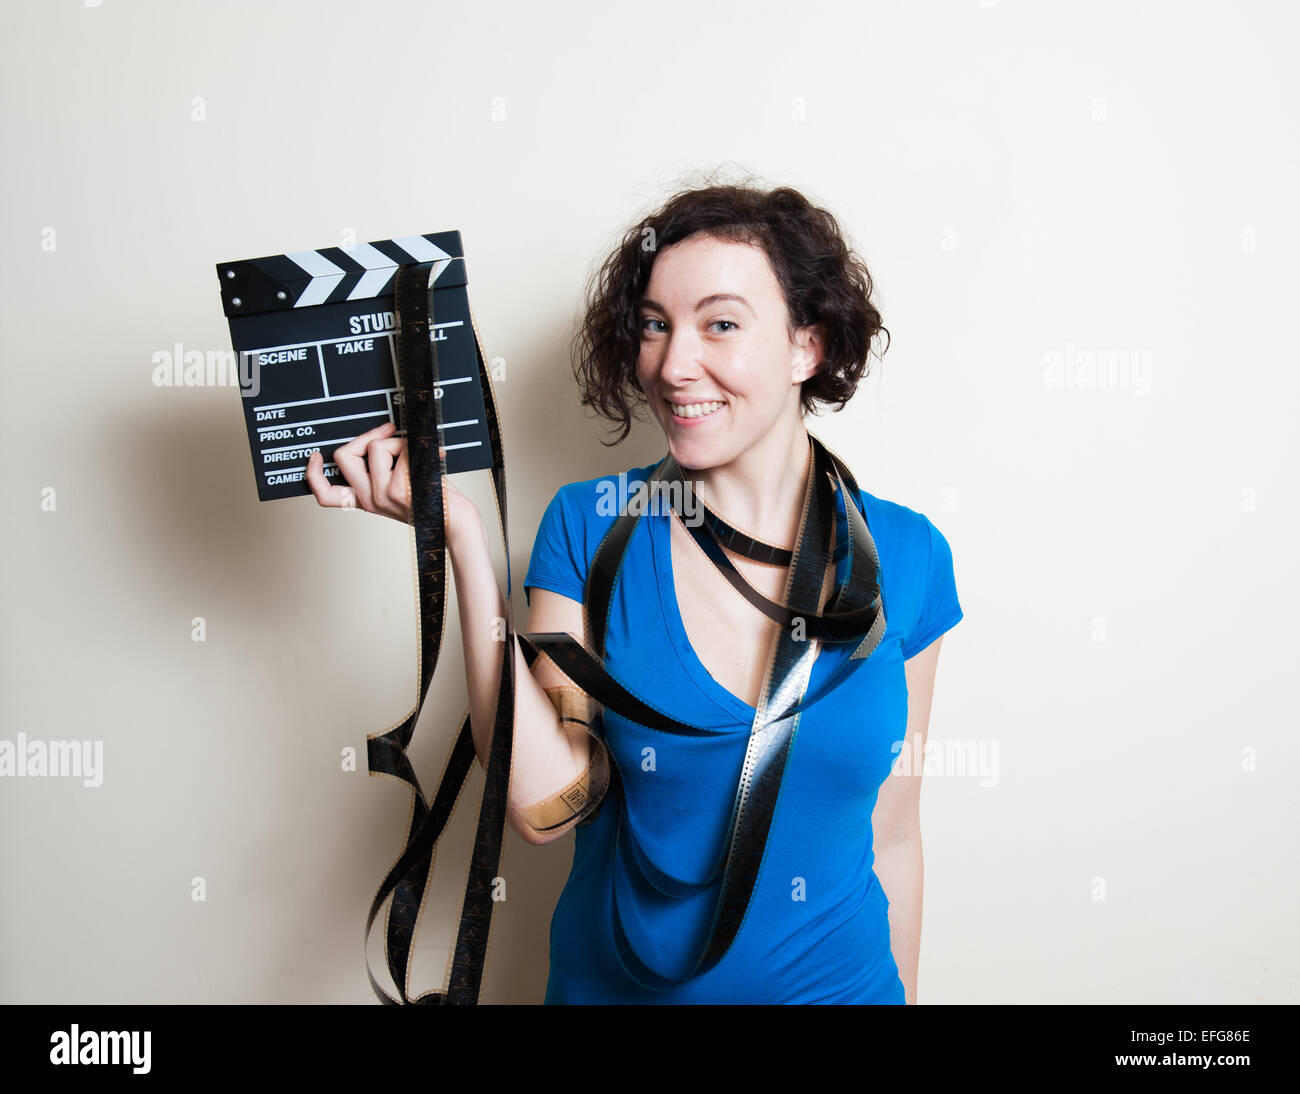 Young pretty woman with blue casual t-shirt and filmstrip around neck is smiling, holding a movie clapper on white background Stock Photo